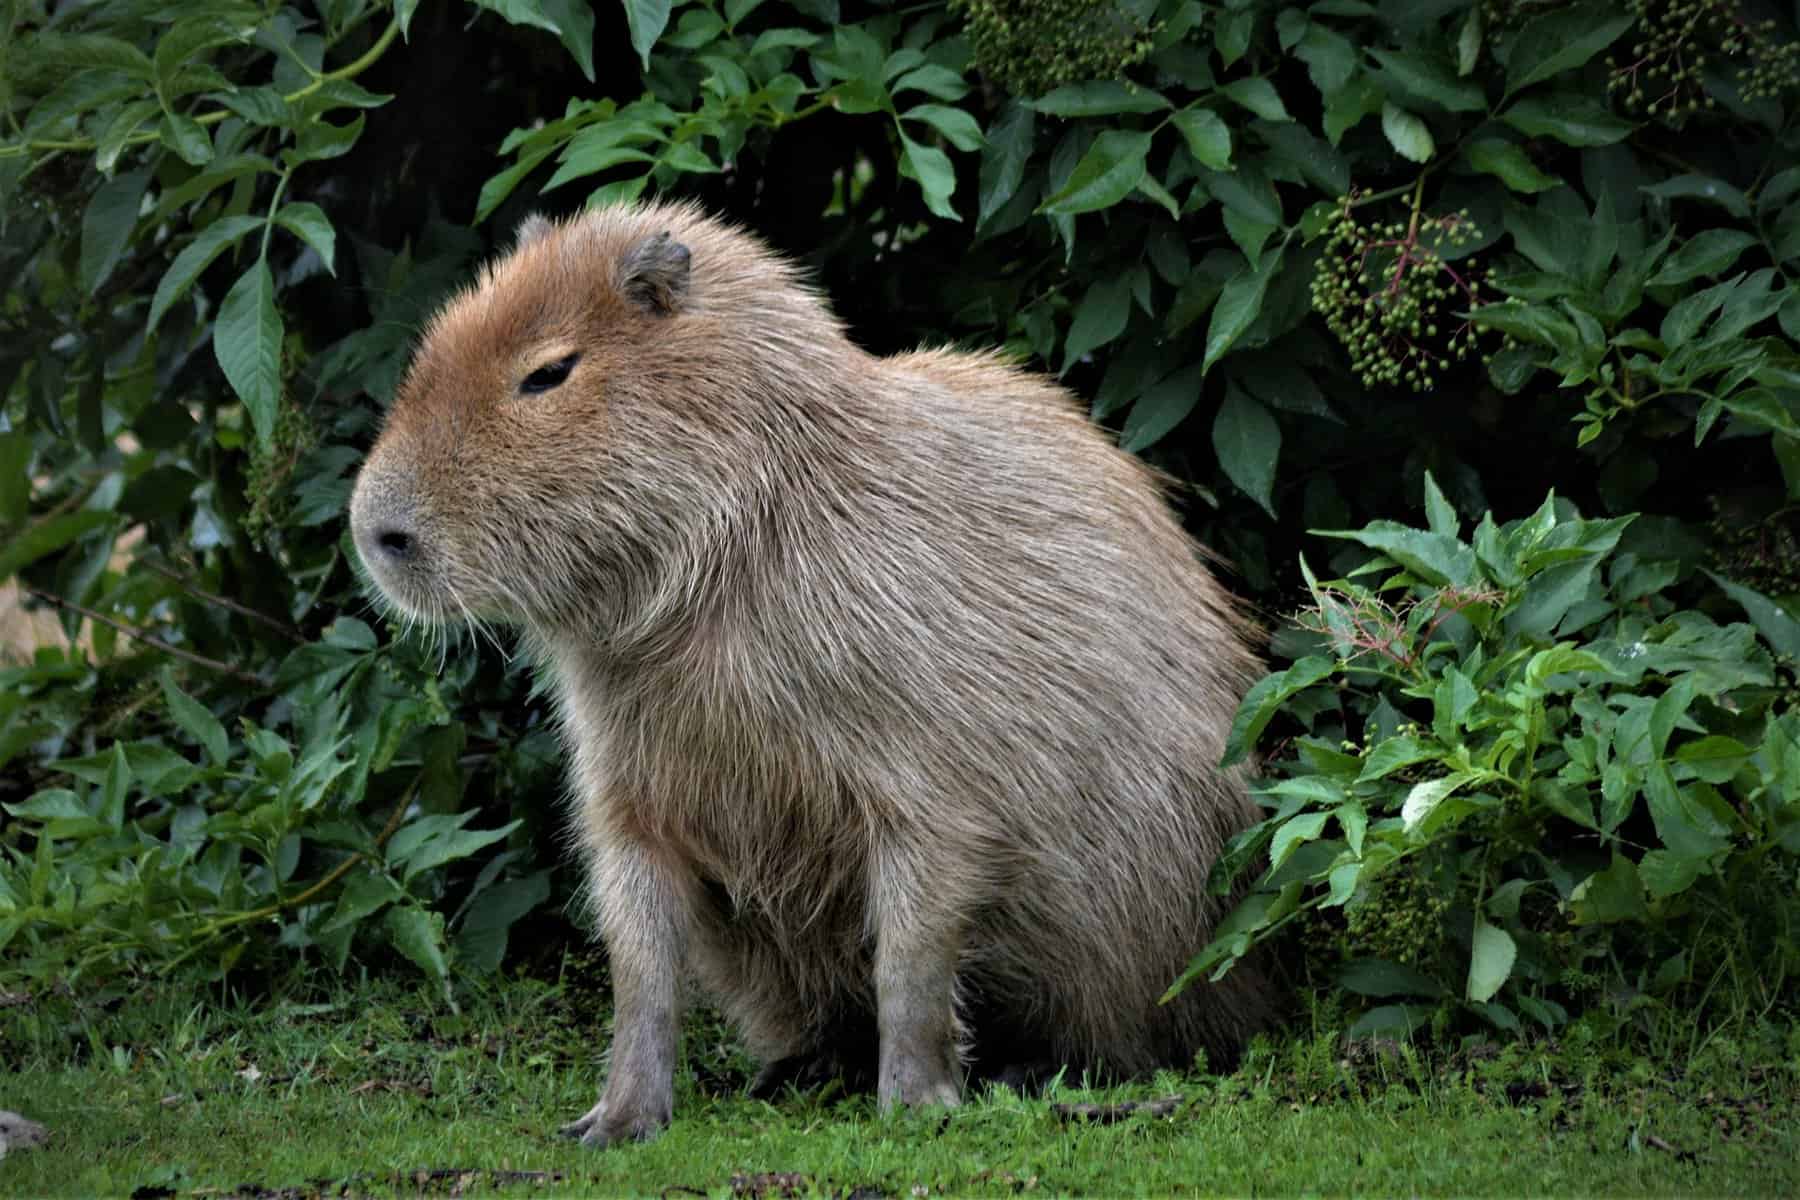 Is It Legal to Own Capybaras as Pets